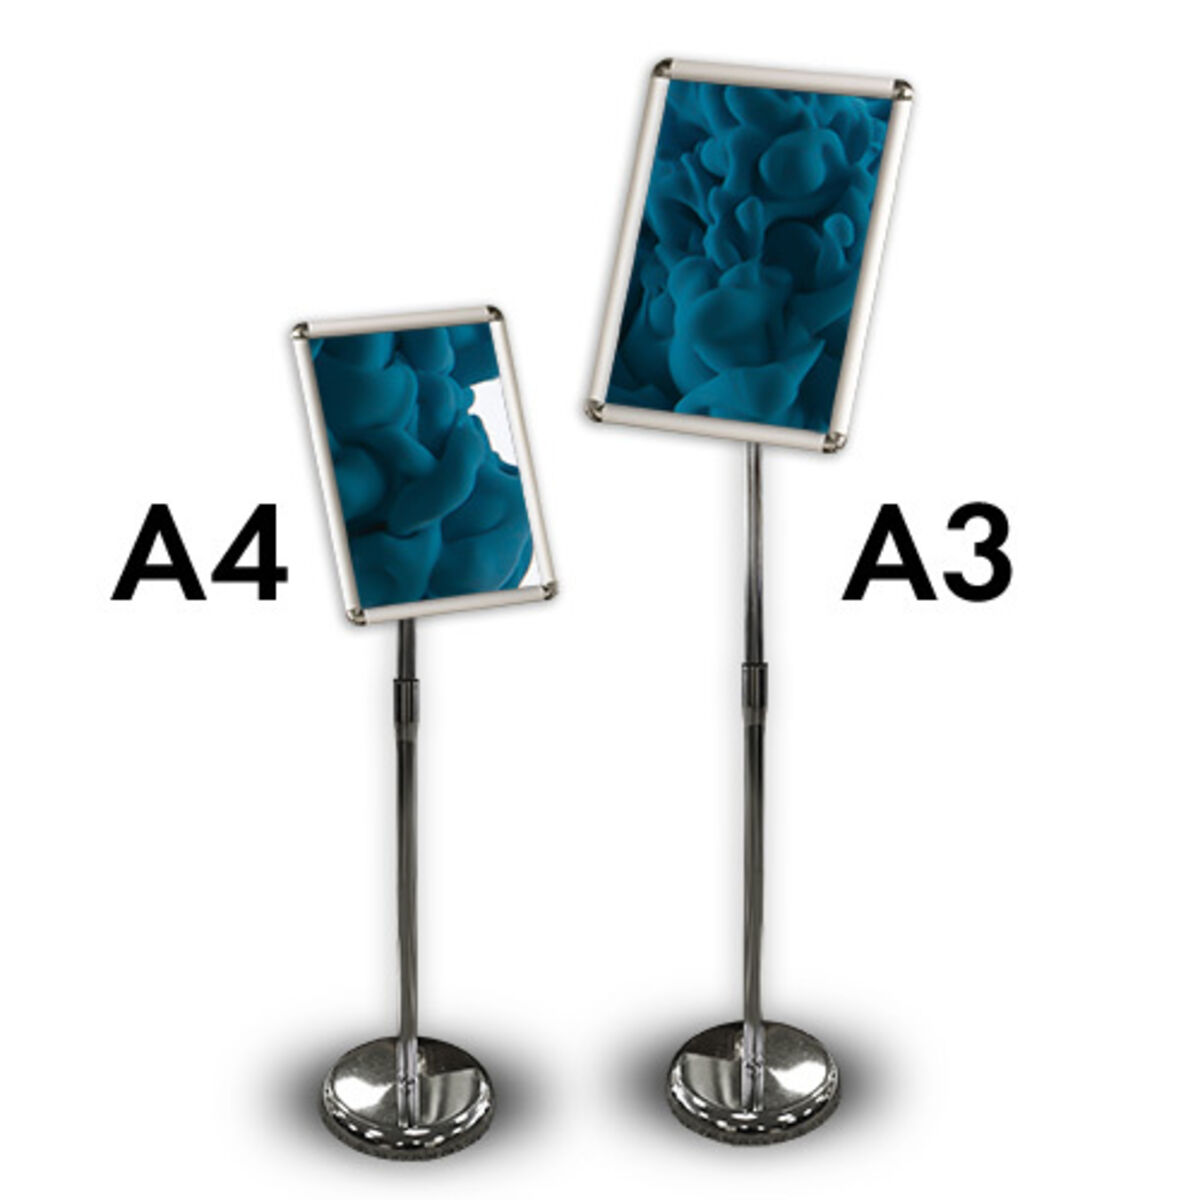 Freestanding telescopic pole snap frame poster holder A4 and A3 size.jpg